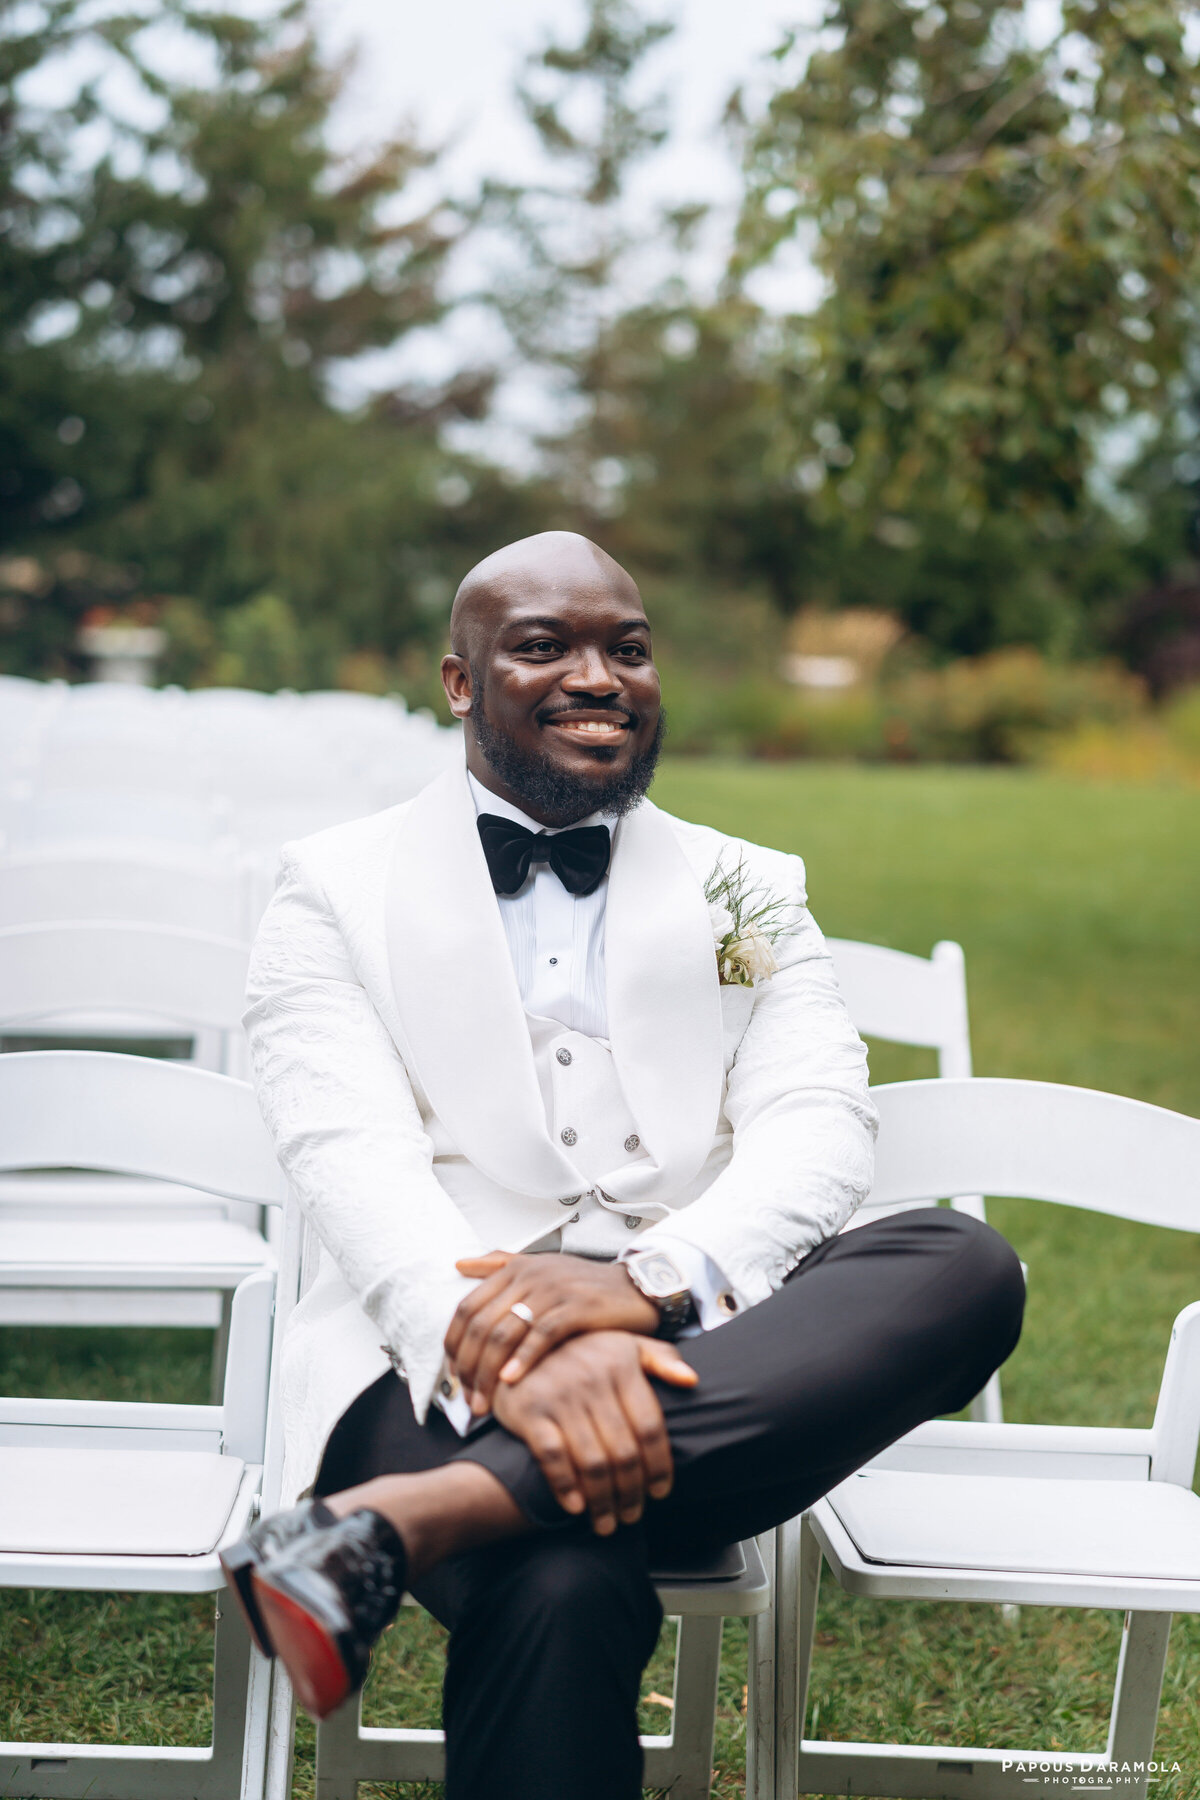 Abigail and Abije Oruka Events Papouse photographer Wedding event planners Toronto planner African Nigerian Eyitayo Dada Dara Ayoola outdoor ceremony floral princess ballgown rolls royce groom suit potraits  paradise banquet hall vaughn 195